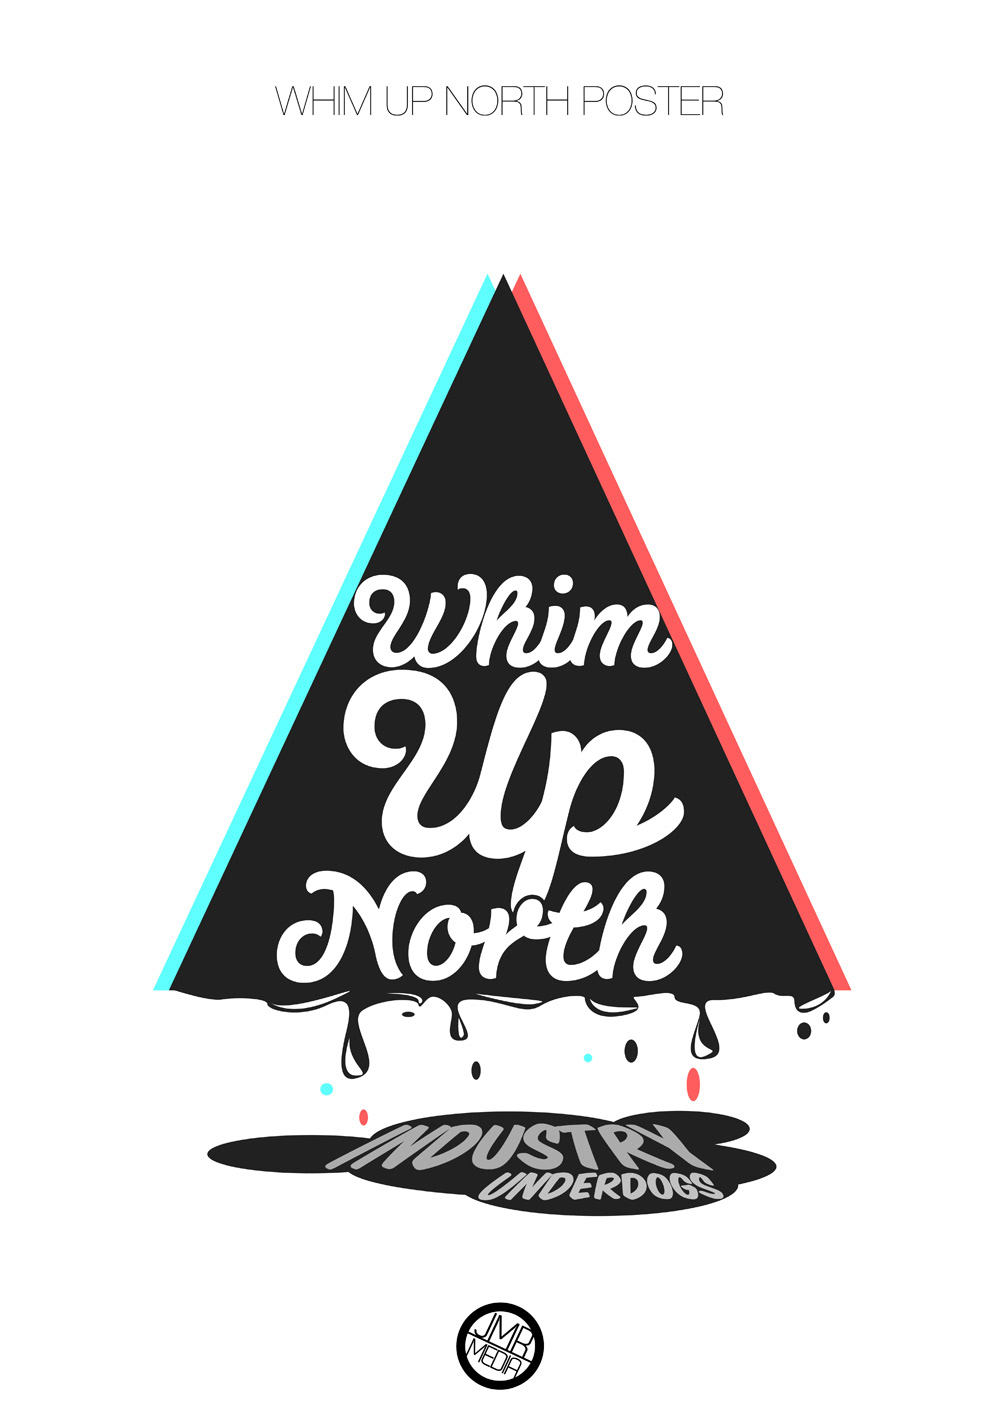 whim up north logo record label University Project